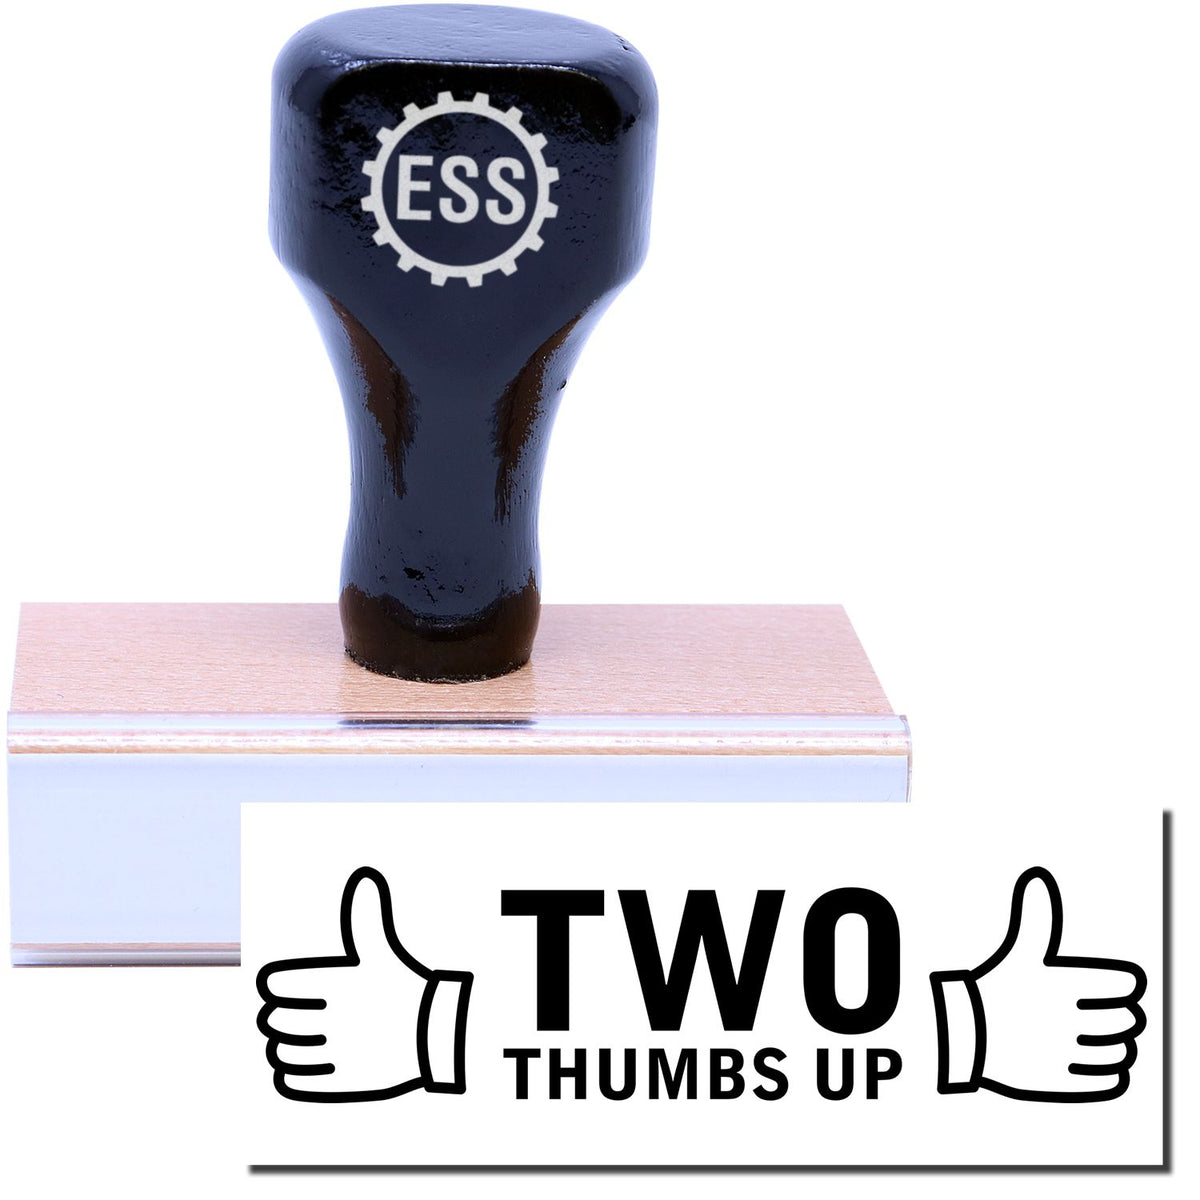 A stock office rubber stamp with a stamped image showing how the text &quot;TWO THUMBS UP&quot; in large font with two thumbs pointing up on each side of the text is displayed after stamping.